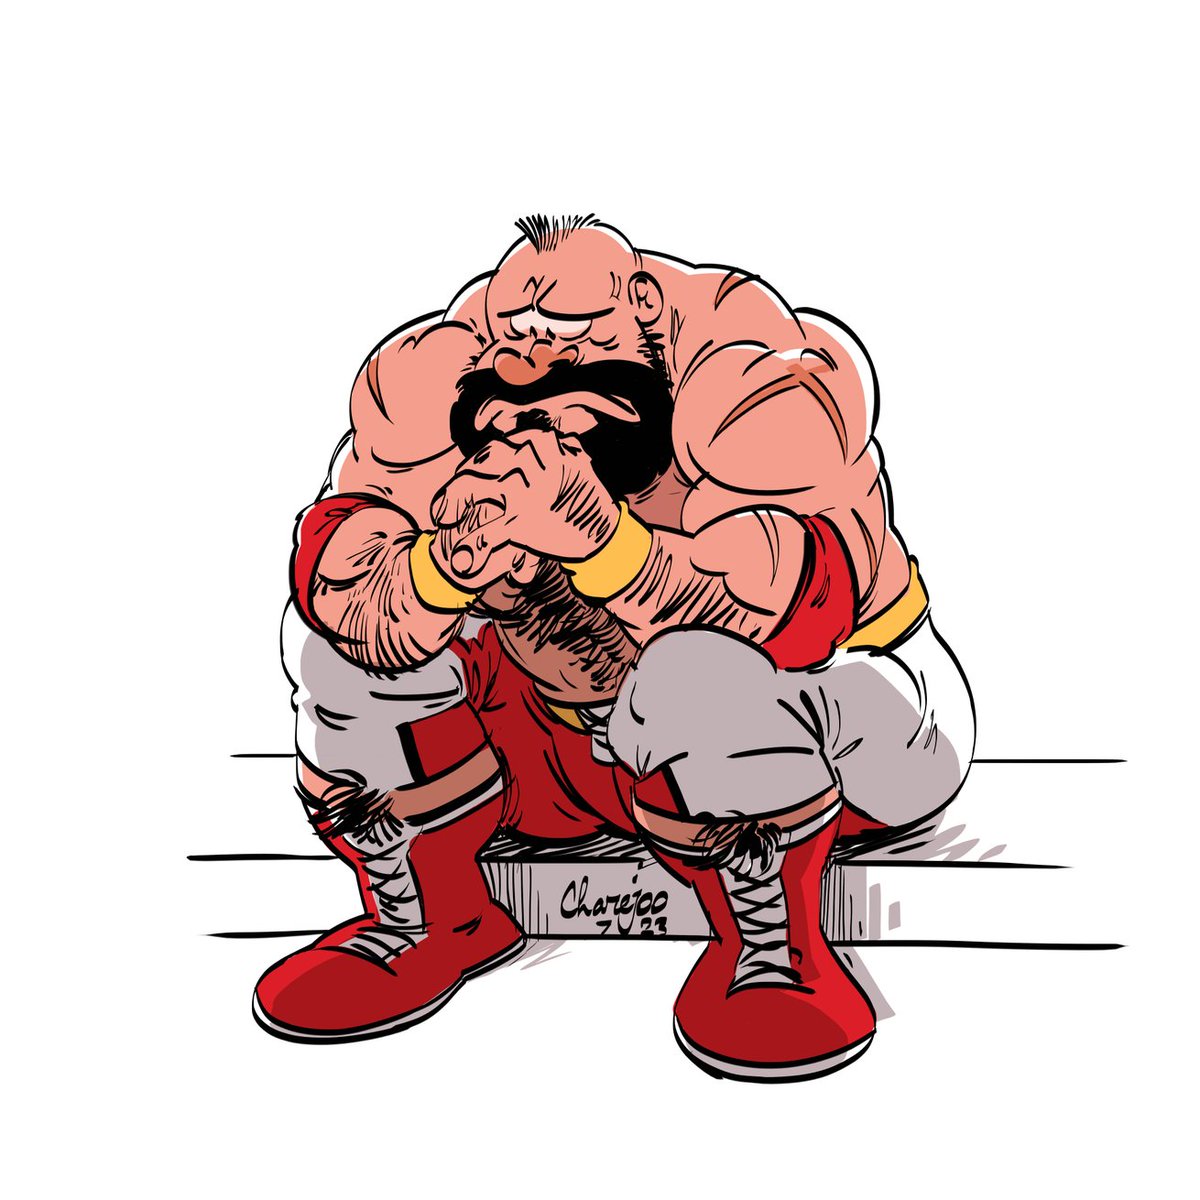 Zangief wonders if lariat will ever have a back hitbox again. #StreetFighter #StreetFighter6 #fanart